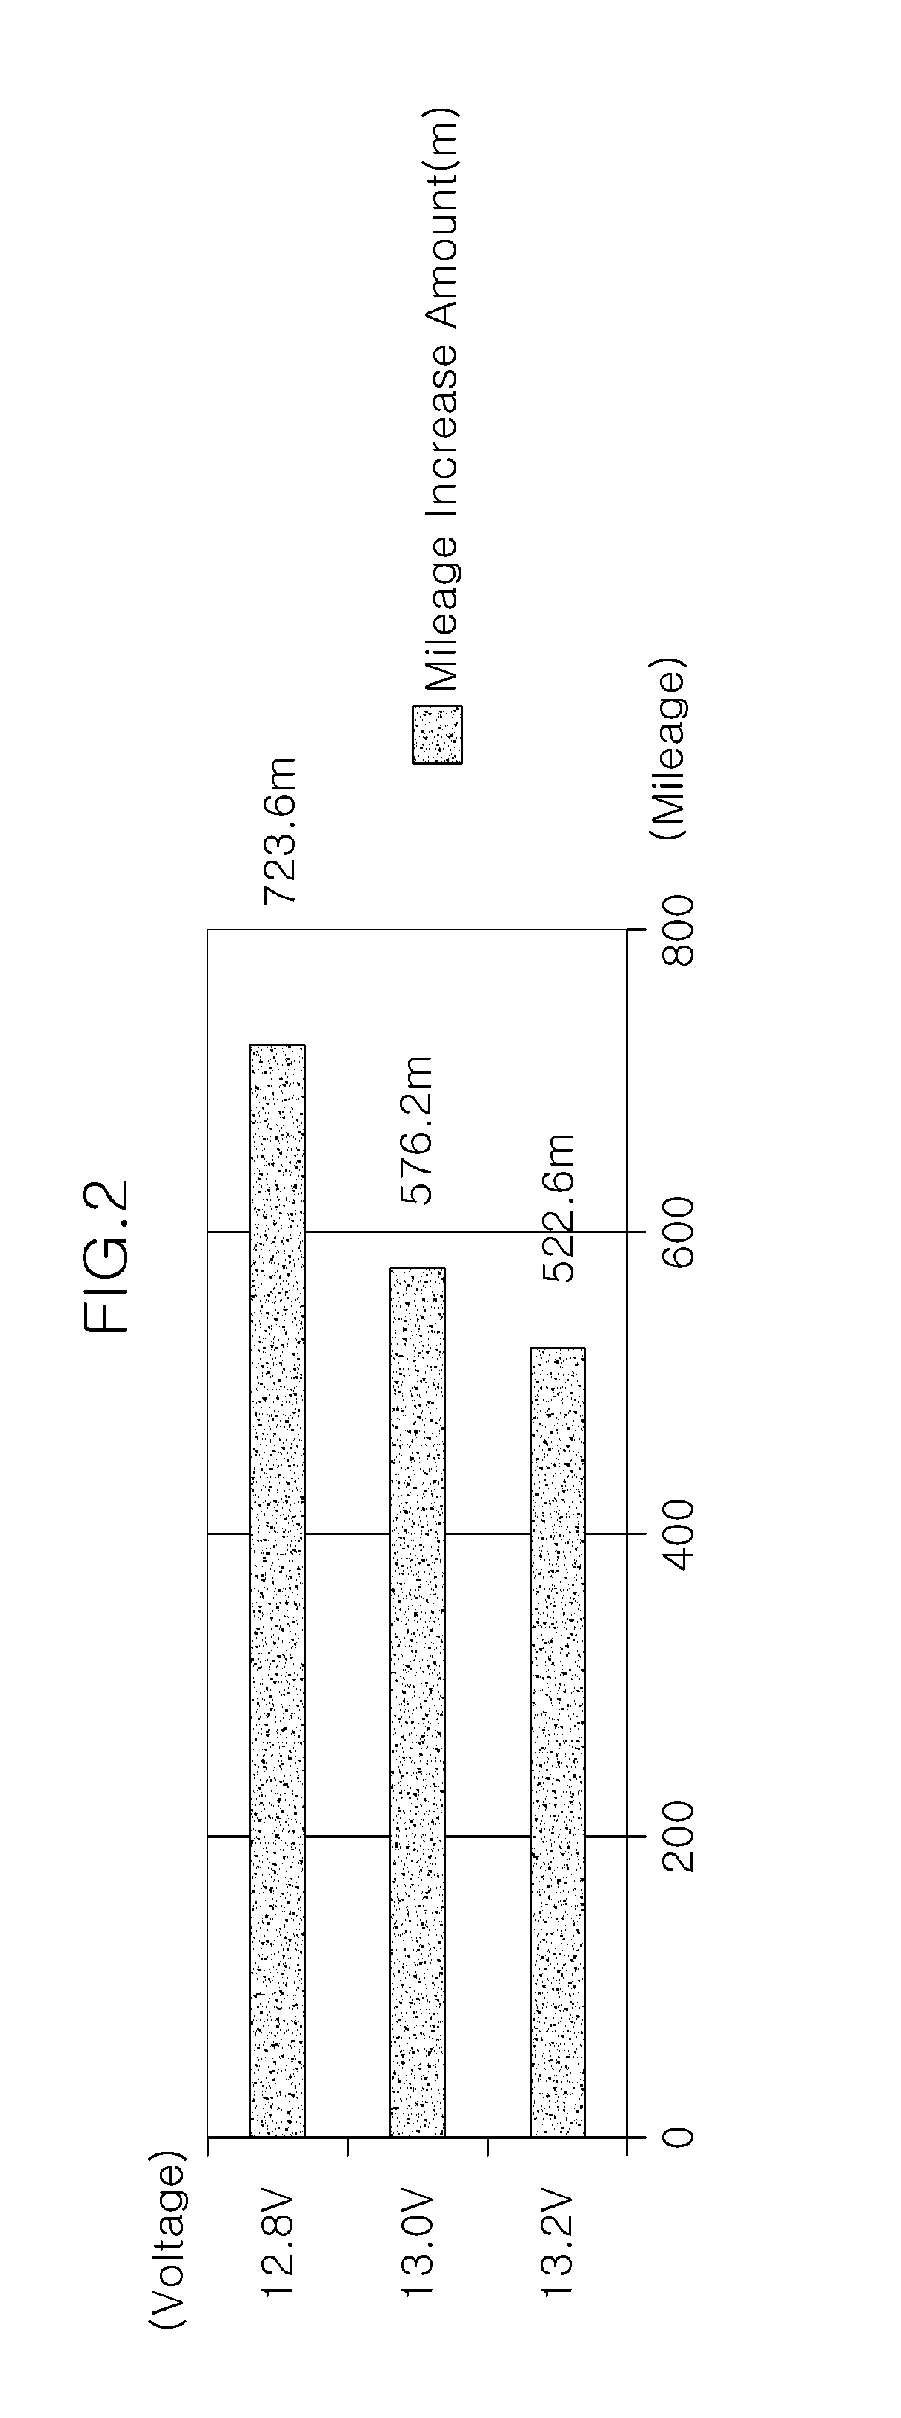 Active control system for low dc/dc converter in an electric vehicle